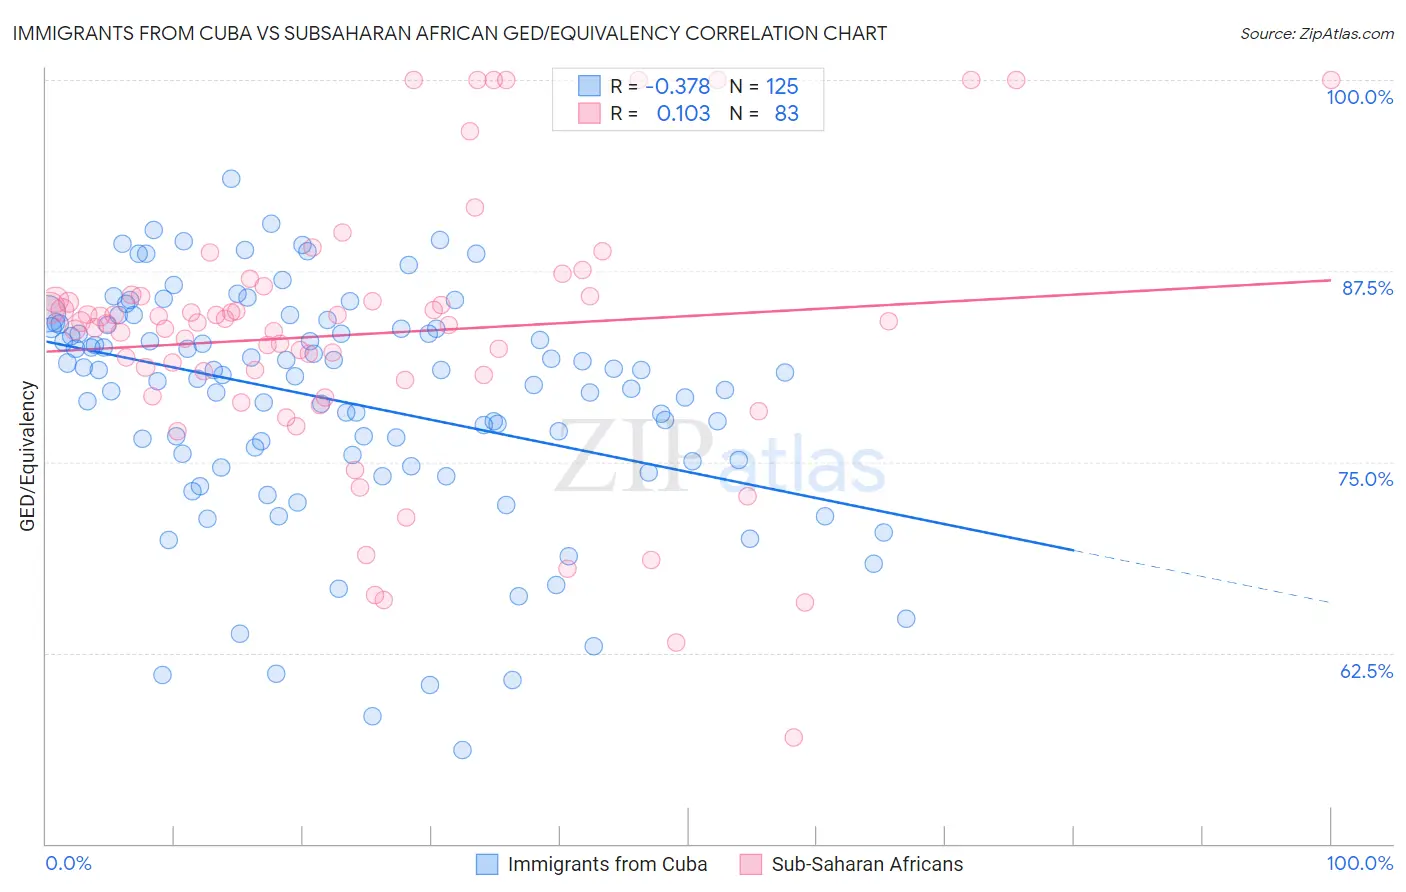 Immigrants from Cuba vs Subsaharan African GED/Equivalency